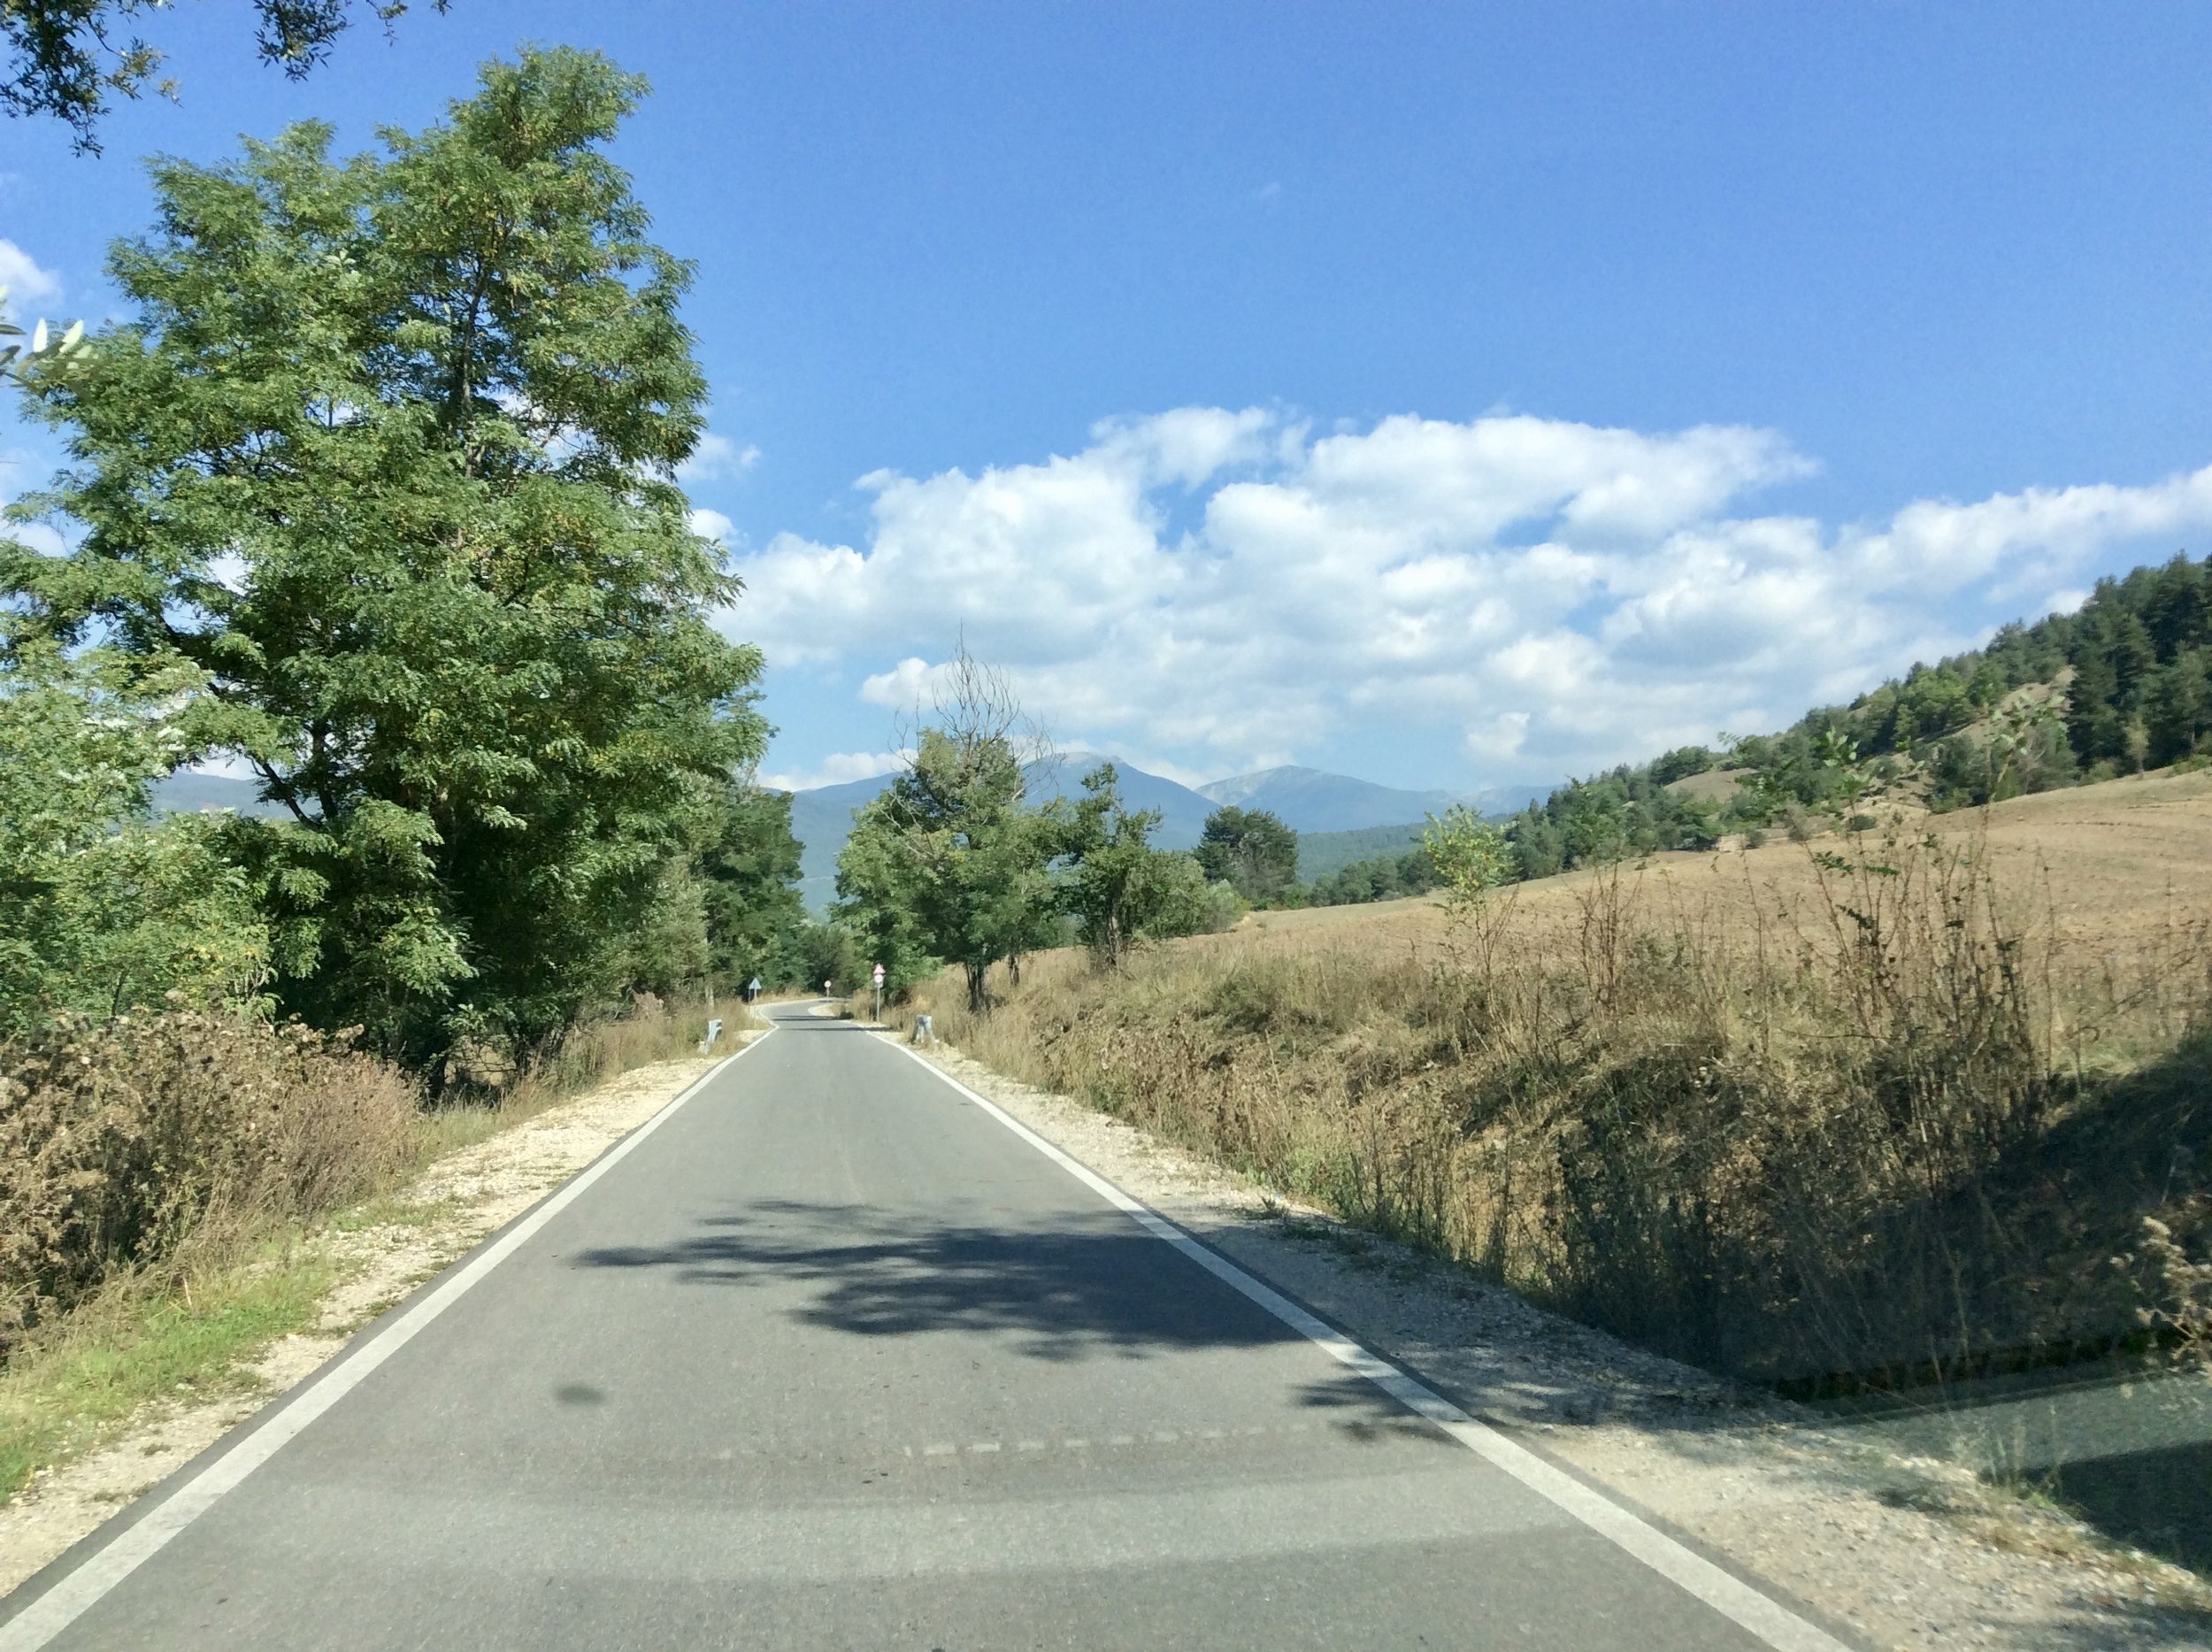 Driving from Belitsa to the Bear Sanctuary